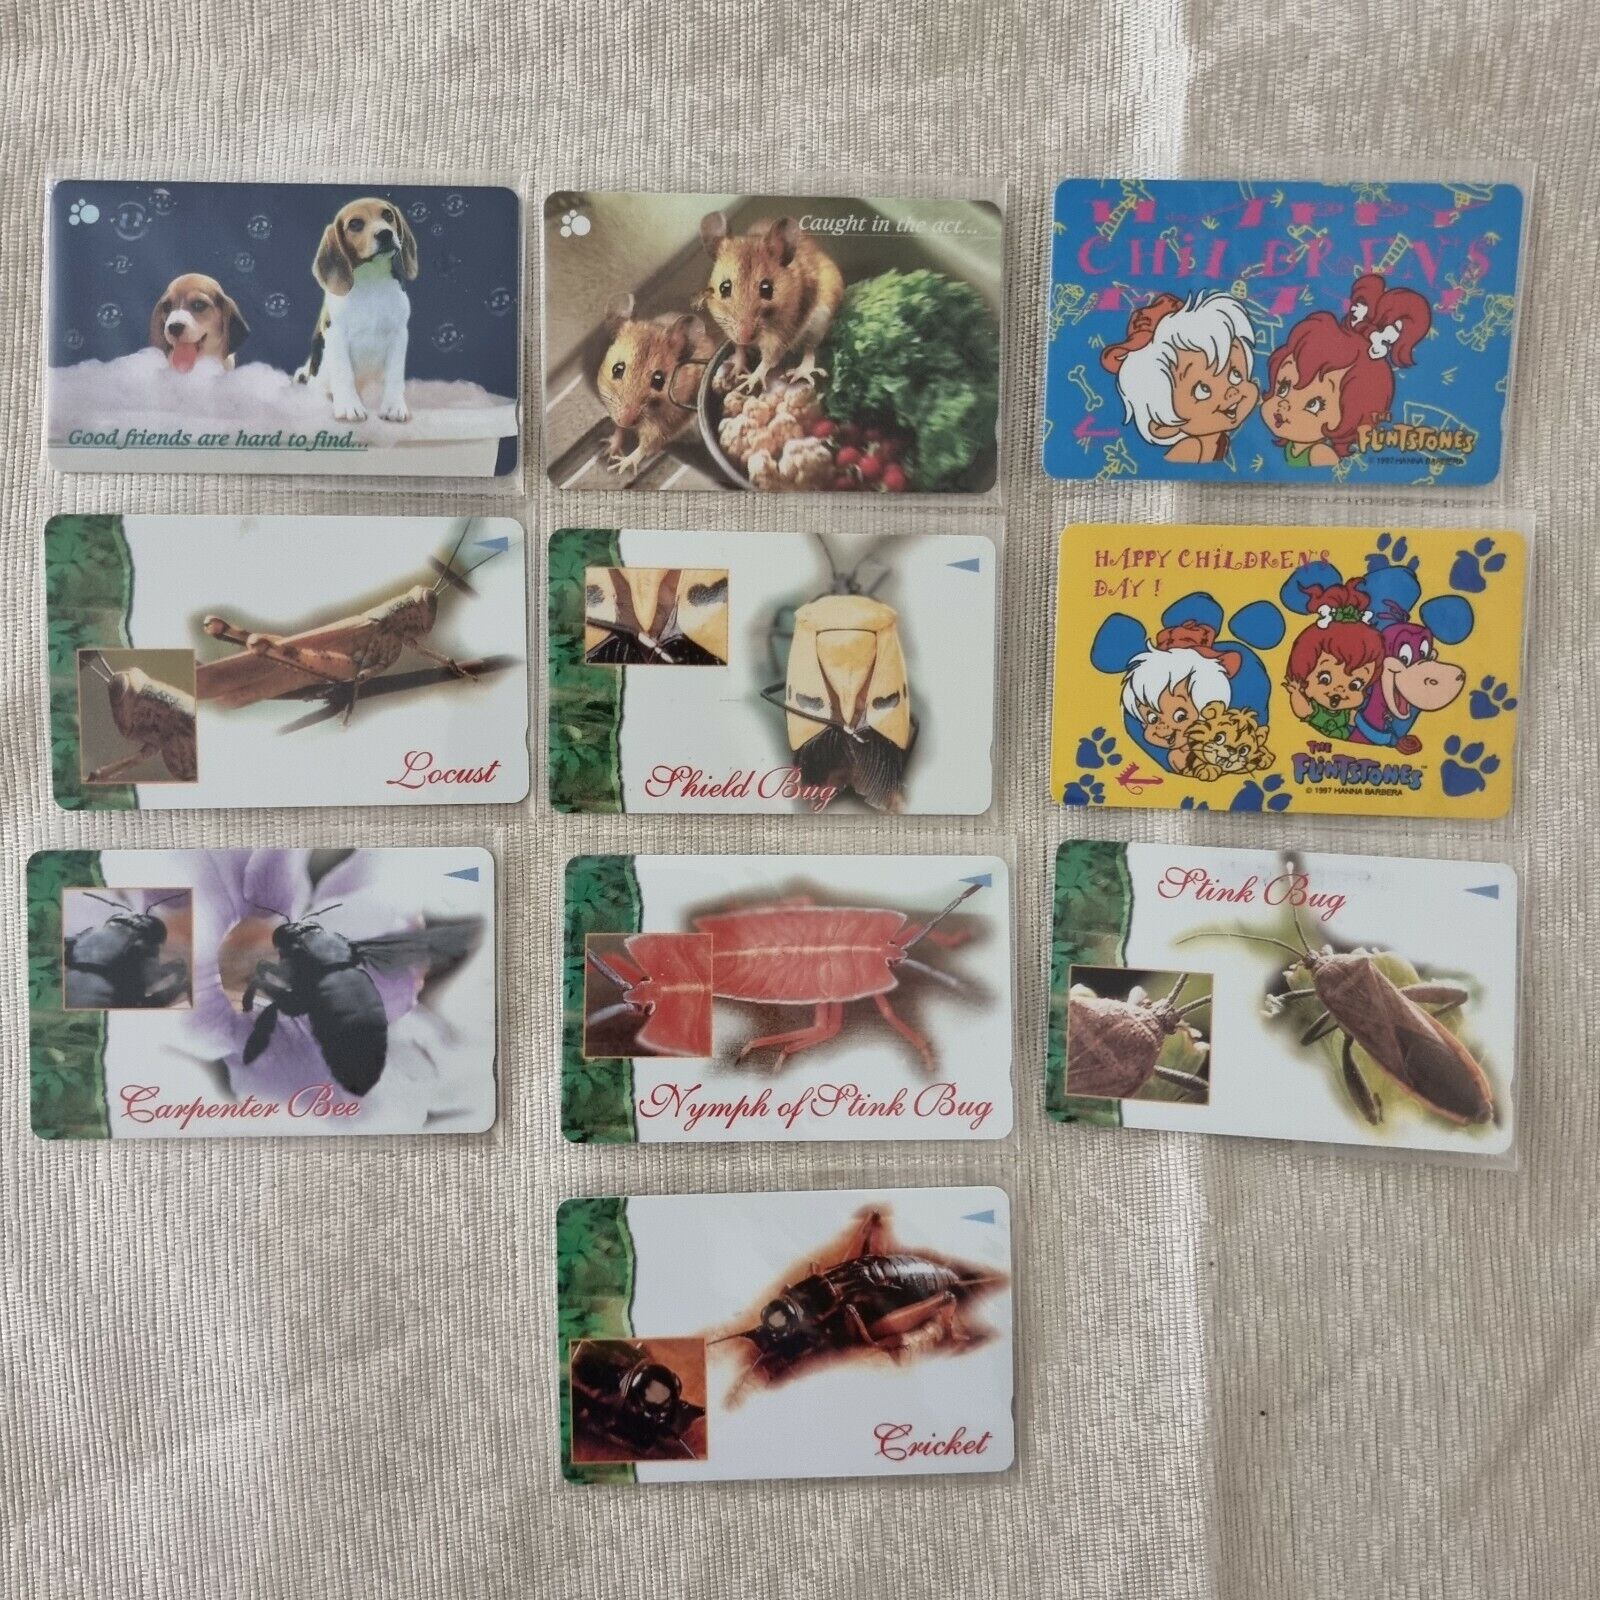 SINGAPORE PHONE CARDS Collection group of 10 animal insects The Flintstones